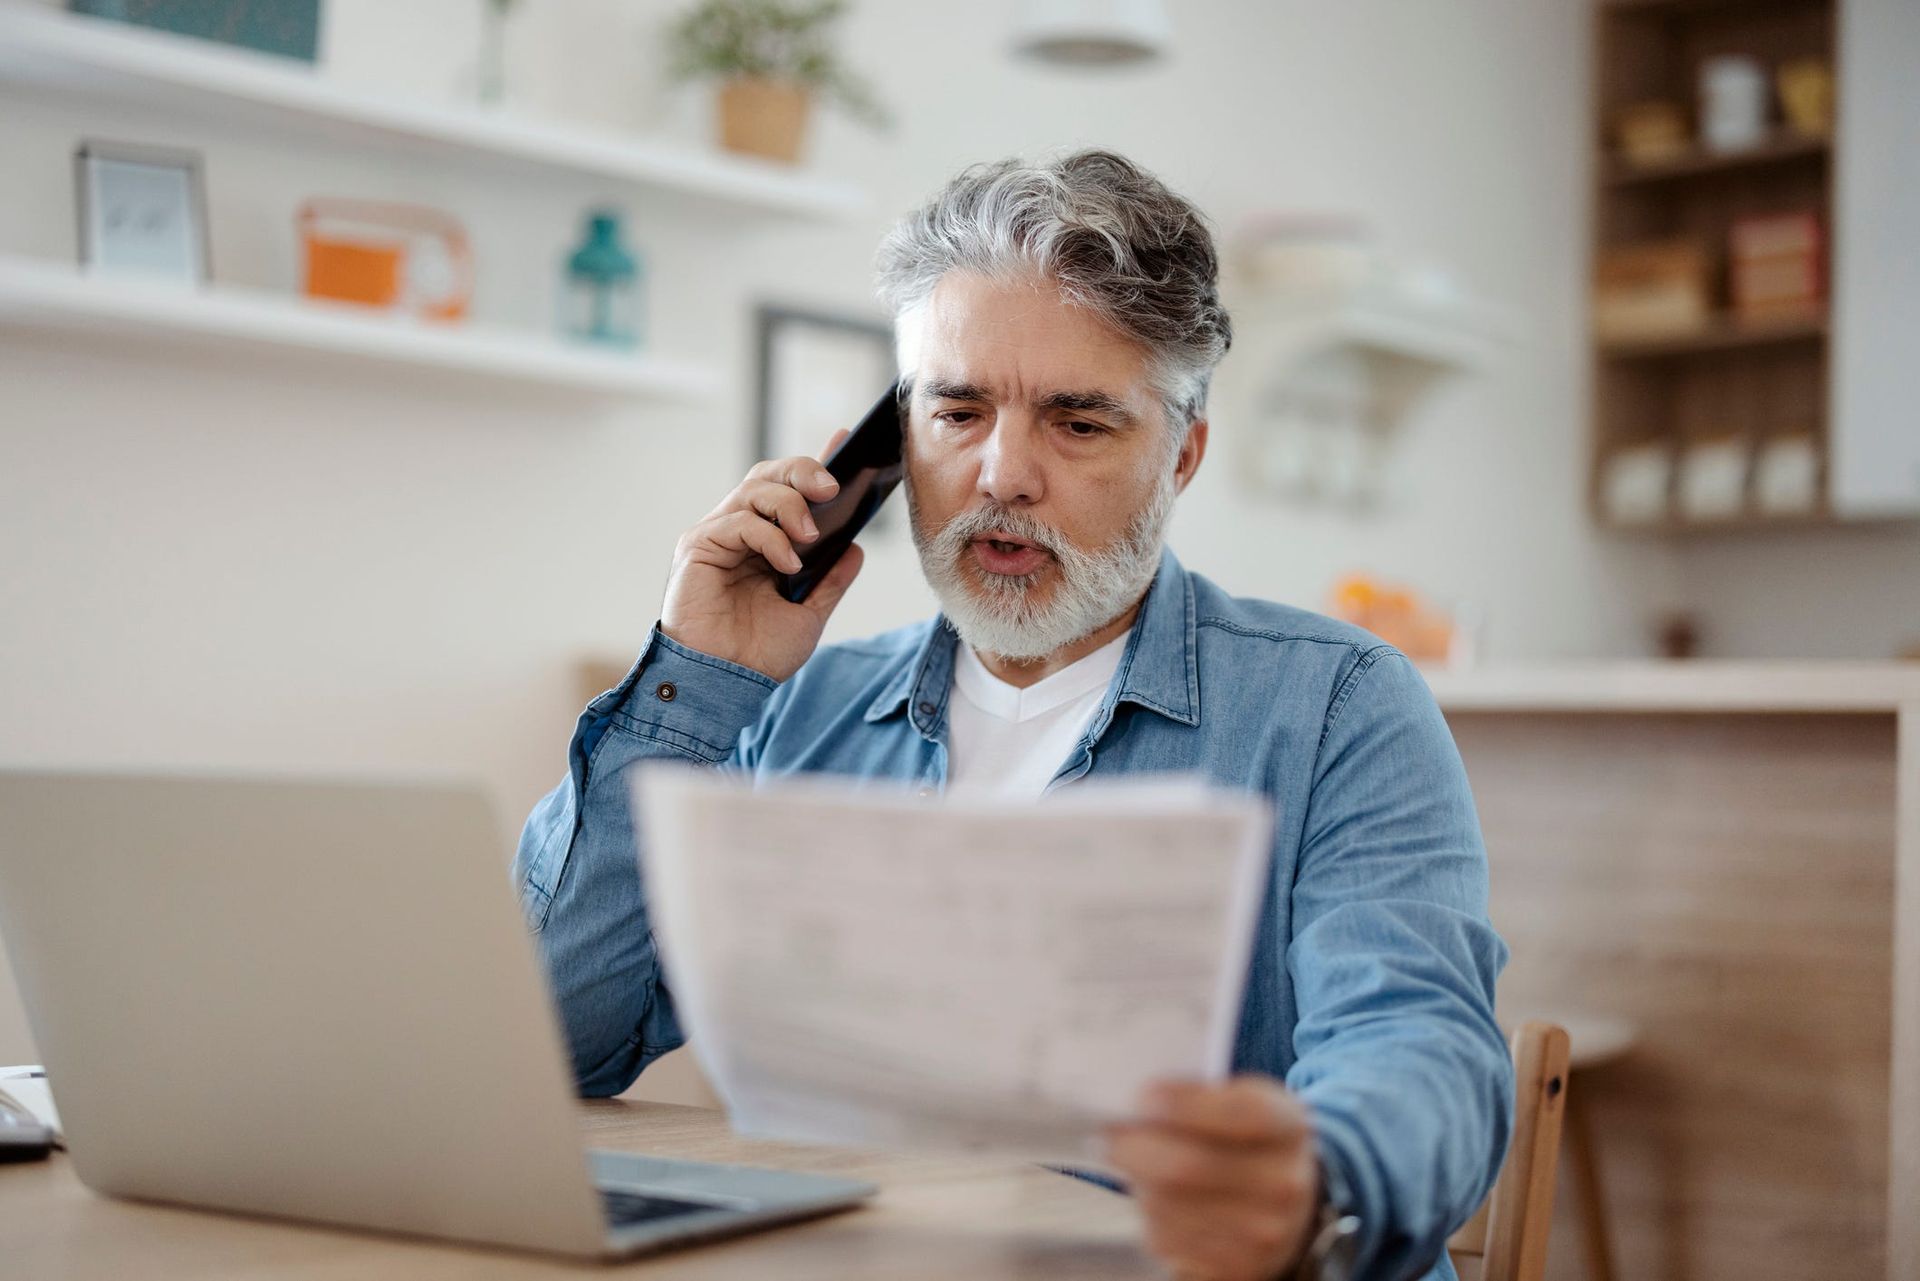 Personal finance: Keep your guard up, learn the sneaky ways scammers work - CapWealth Financial Advi